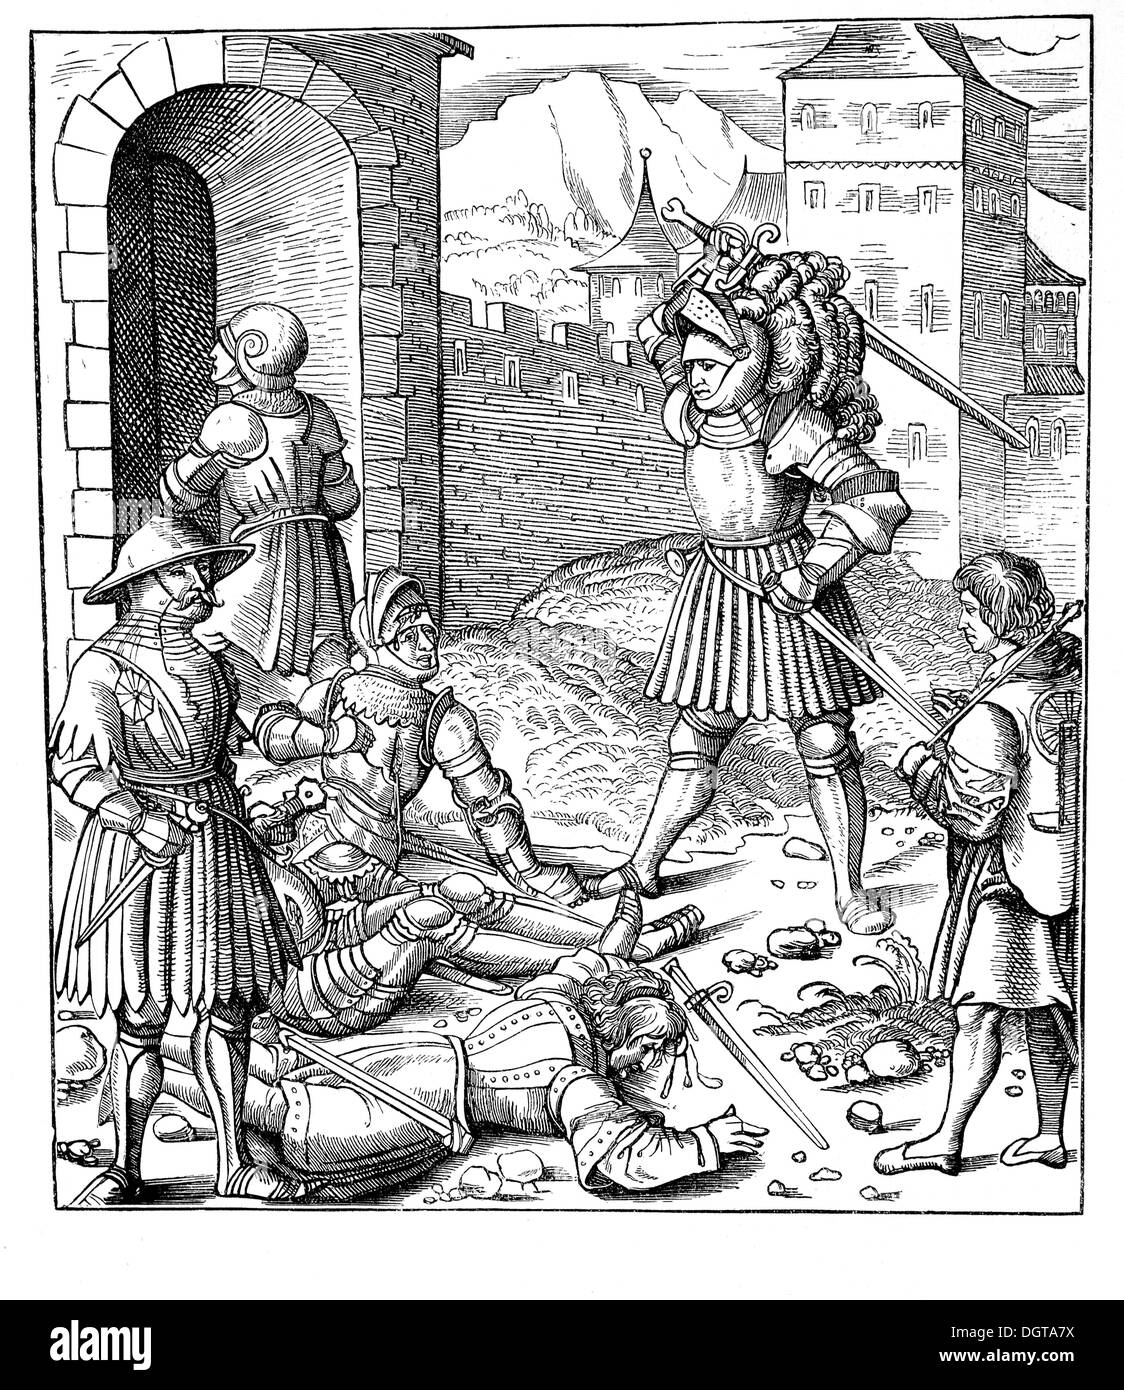 Accurate reproduction of a woodcut from the Teuerdank, historical image from History of German Literature from 1885 Stock Photo